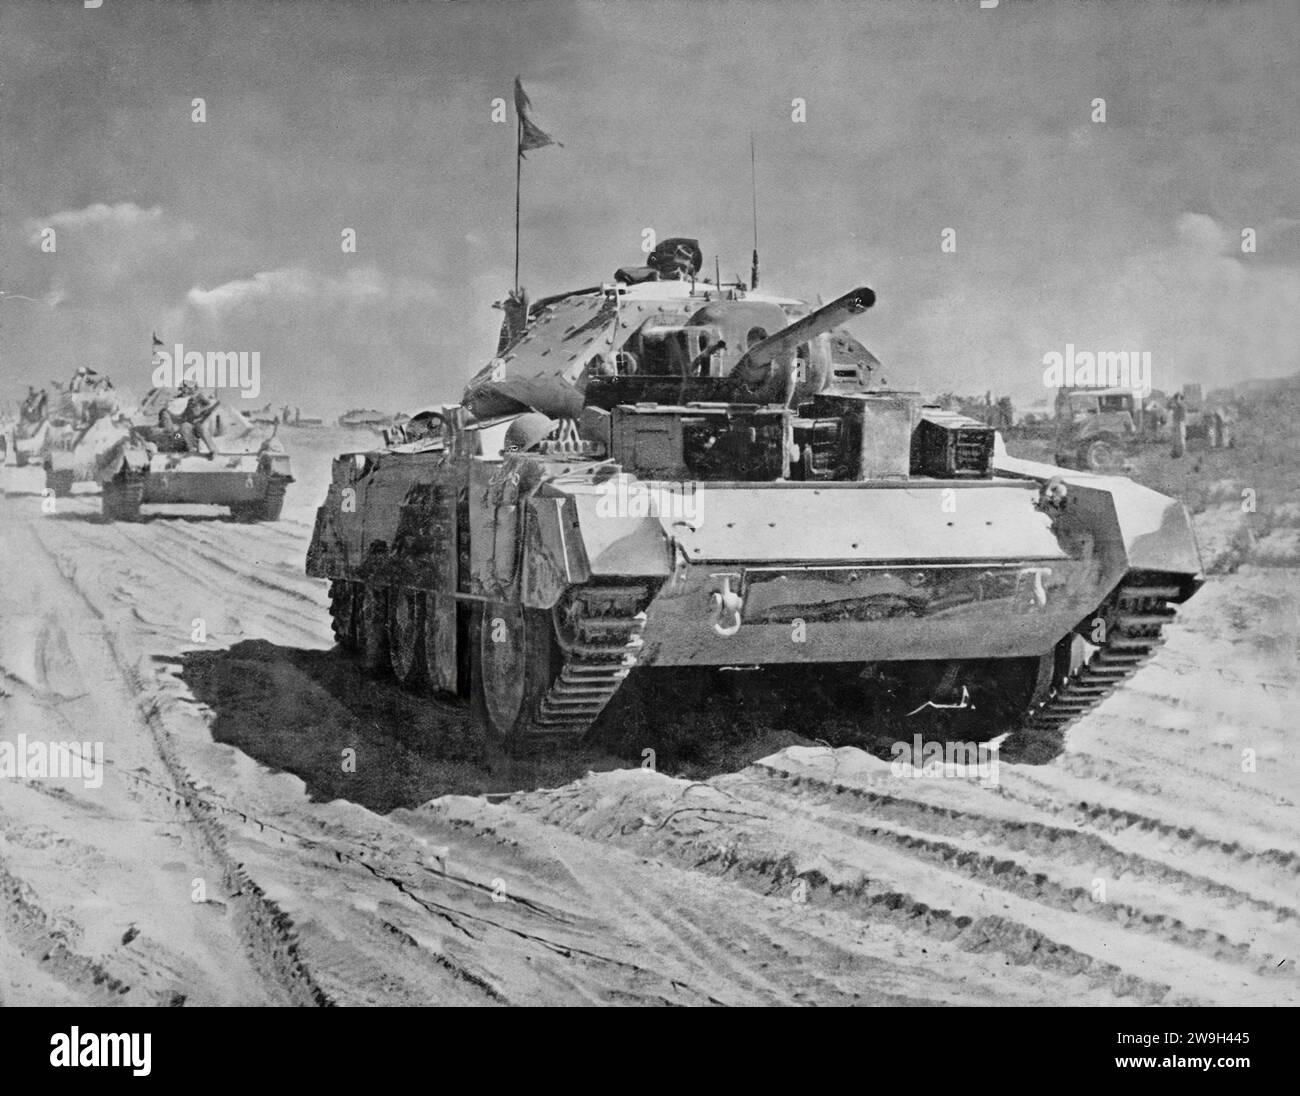 British tanks en route for the Second Battle of El Alamein (23 October – 11 November 1942), a battle of the Second World War that took place near the Egyptian railway halt of El Alamein. Lieutenant-General Bernard Montgomery led the Eighth Army offensive and the Allied victory was the beginning of the end of the Western Desert Campaign, eliminating the Axis threat to Egypt, the Suez Canal and the Middle Eastern and Persian oil fields. Stock Photo